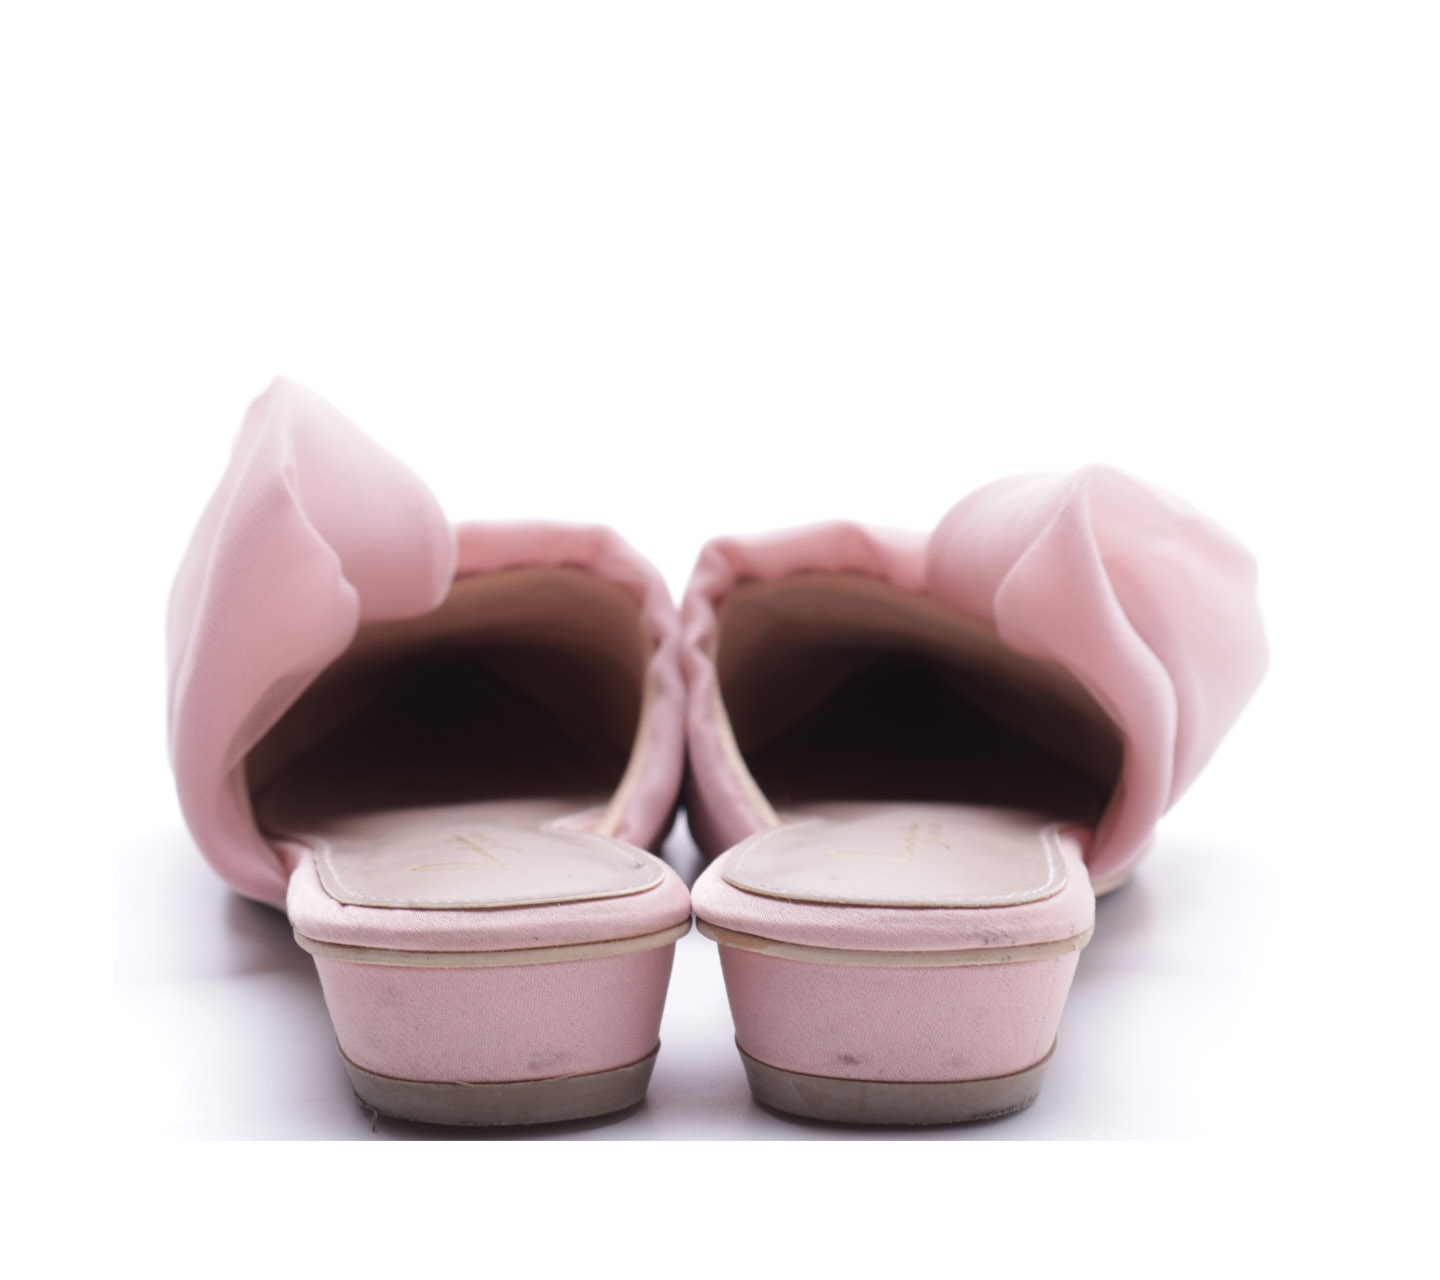 Langkah by Lina Lee Dusty Pink Mules Sandals